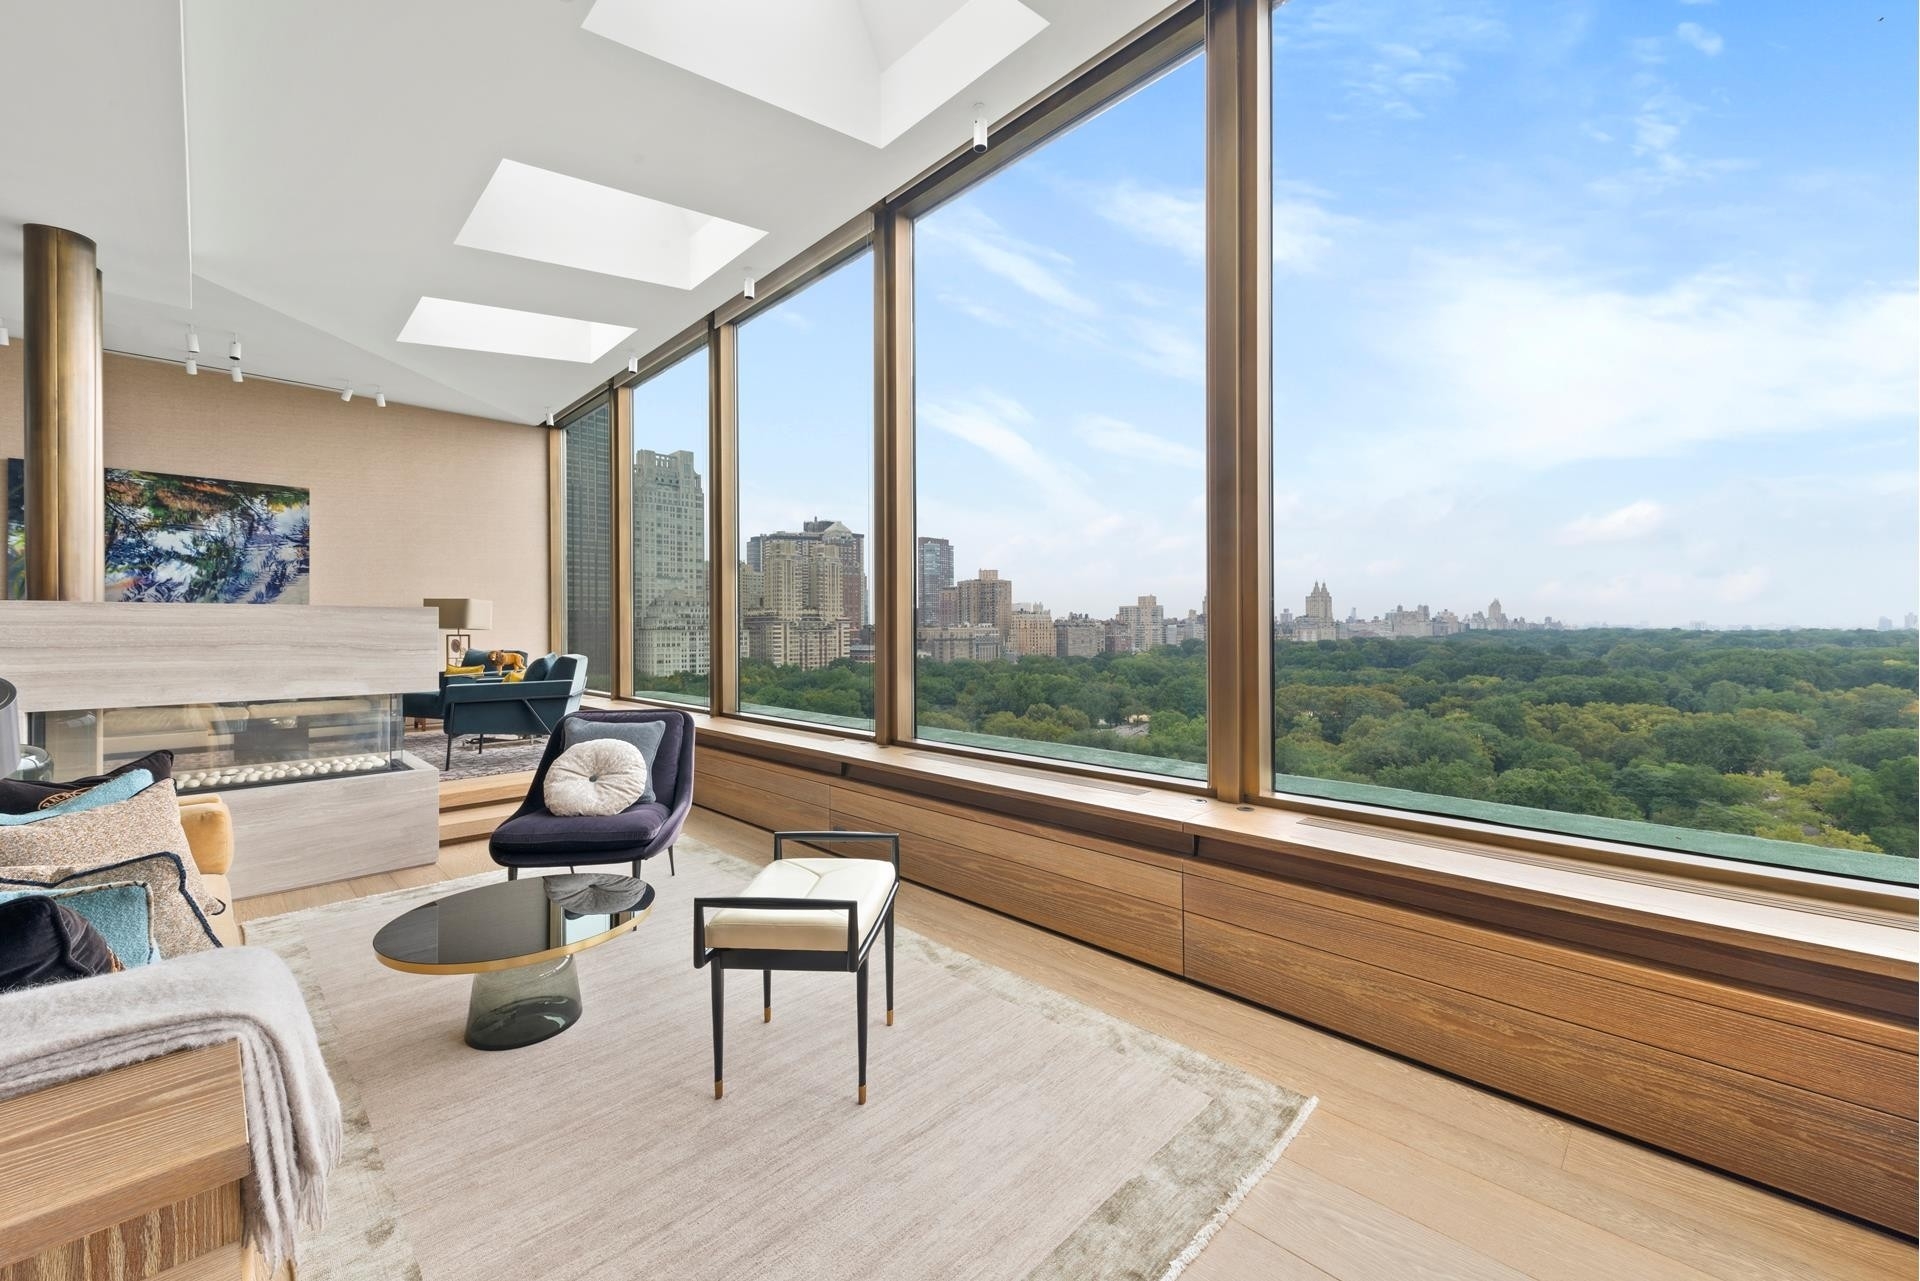 3. Co-op Properties for Sale at 128 CENTRAL PARK S, PH Central Park South, New York, New York 10019